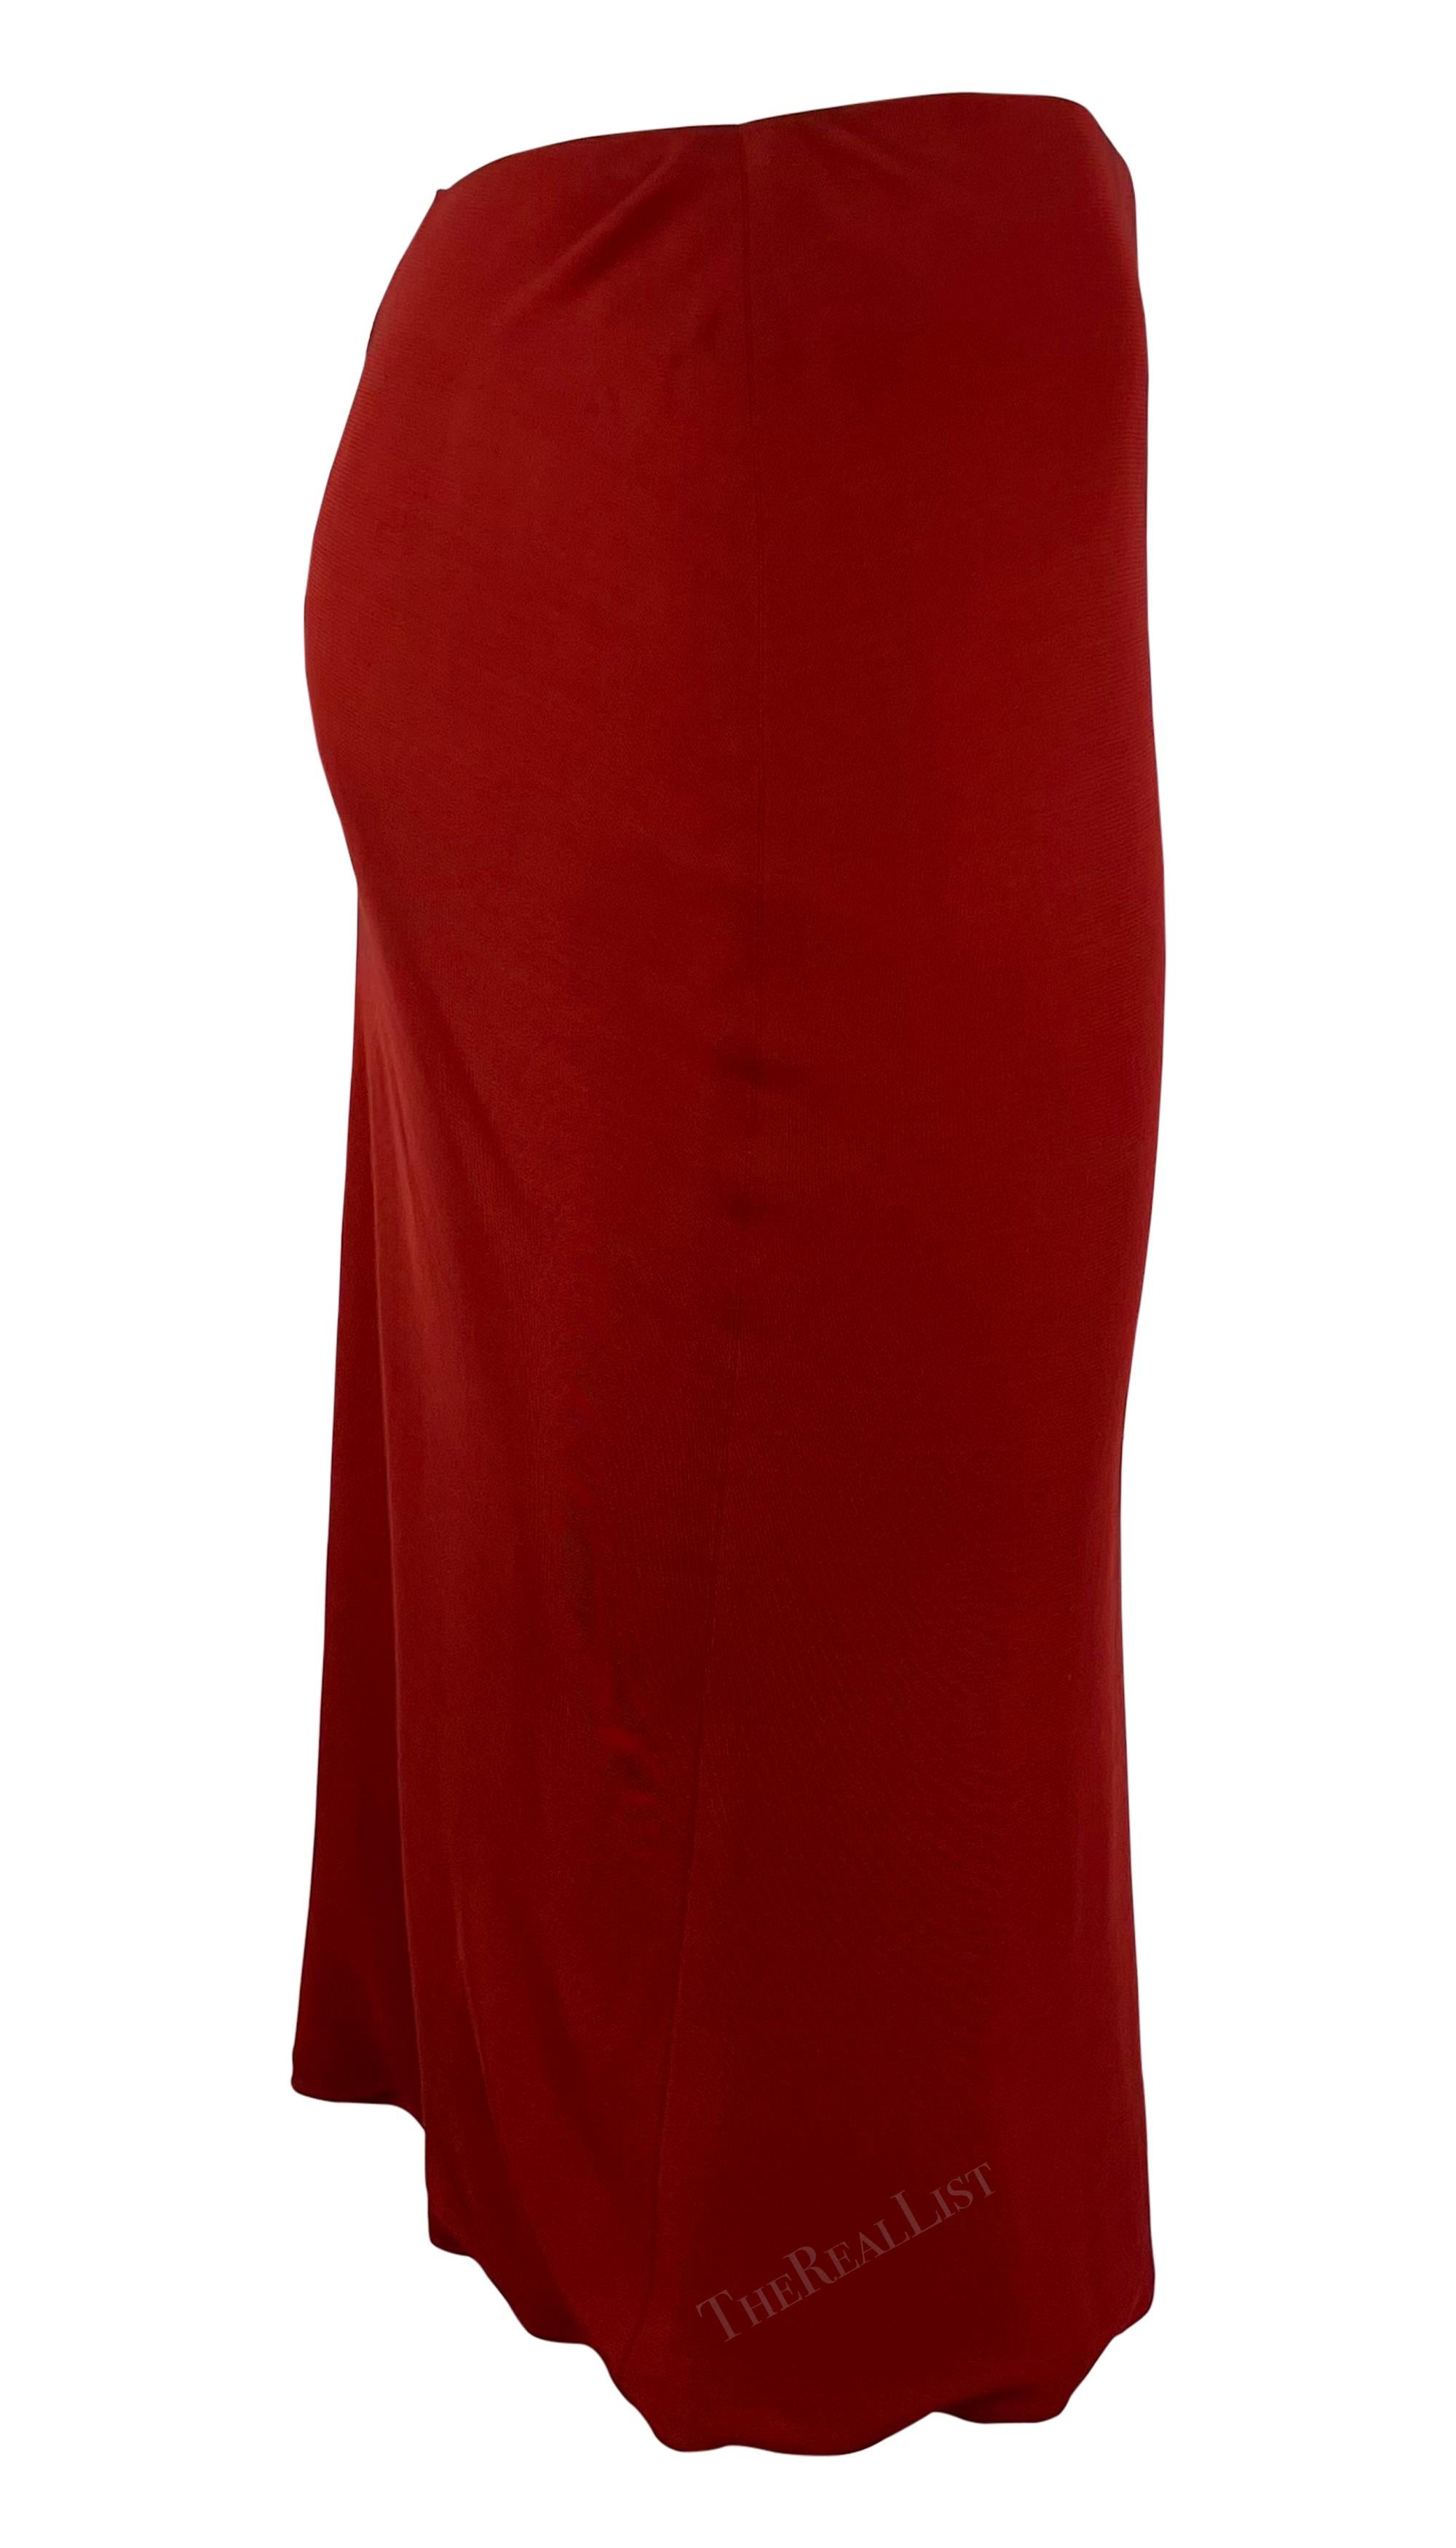 2000s Yigal Azrouel Red Triangle Cutout Stretch Bodycon Skirt Y2K In Excellent Condition For Sale In West Hollywood, CA